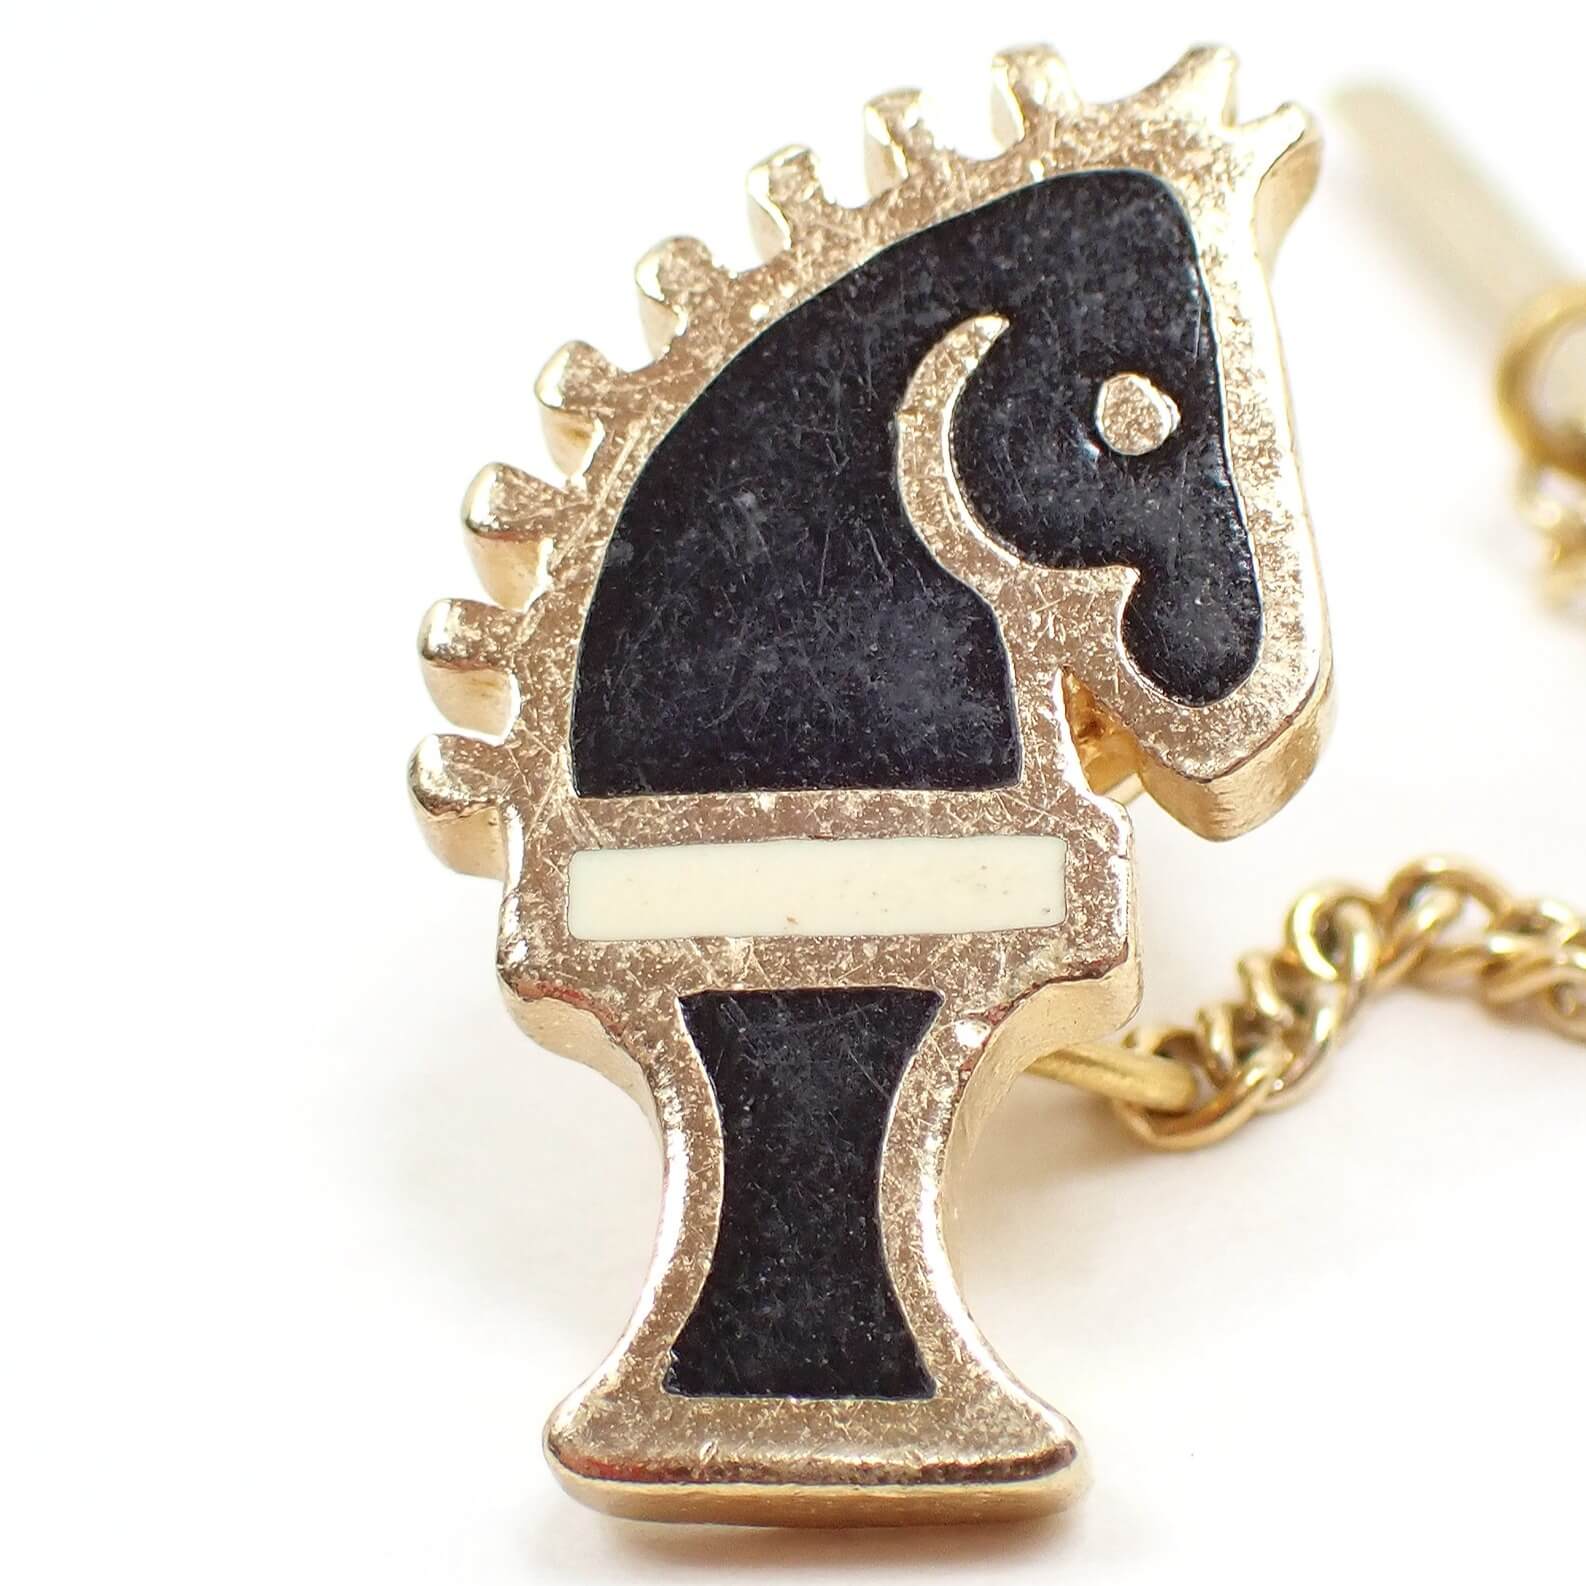 Enlarged front view of the retro vintage chess piece tie tack. The metal is gold tone in color. It is shaped like a knight horse chess piece. The main part of it is black enameled with an off white cream color stripe going across the middle.